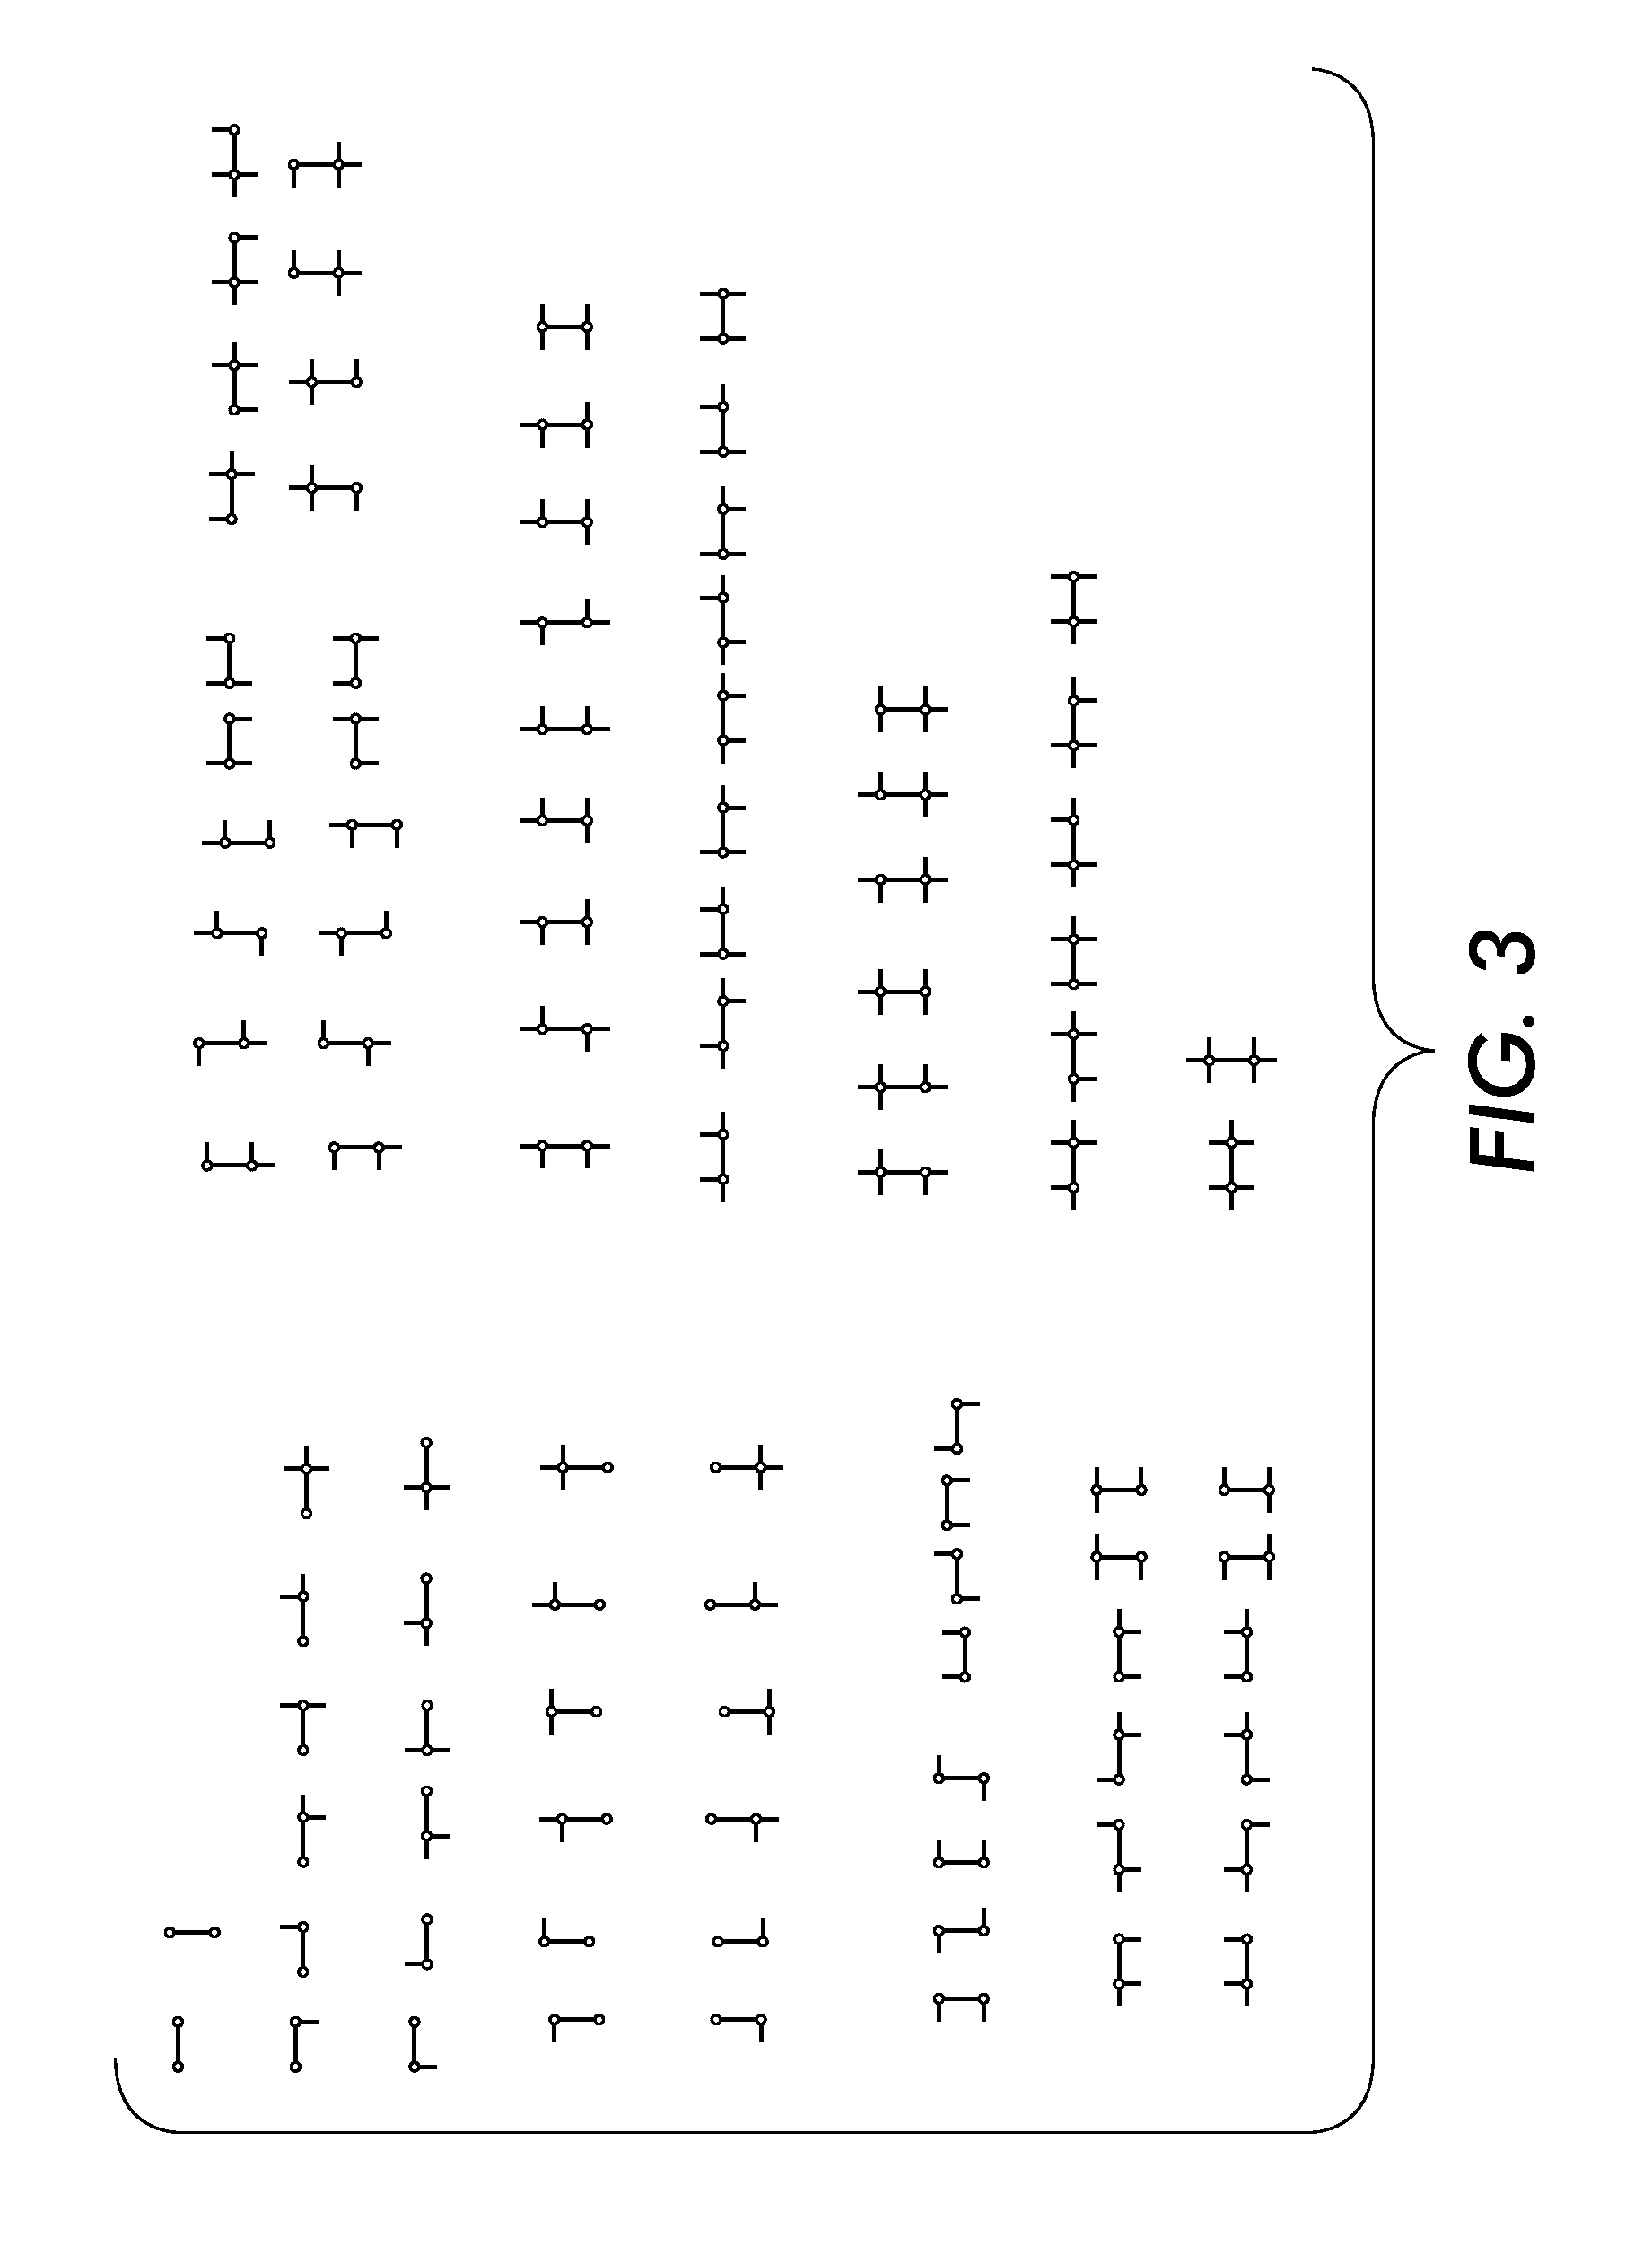 Graph lattice method for image clustering, classification, and repeated structure finding